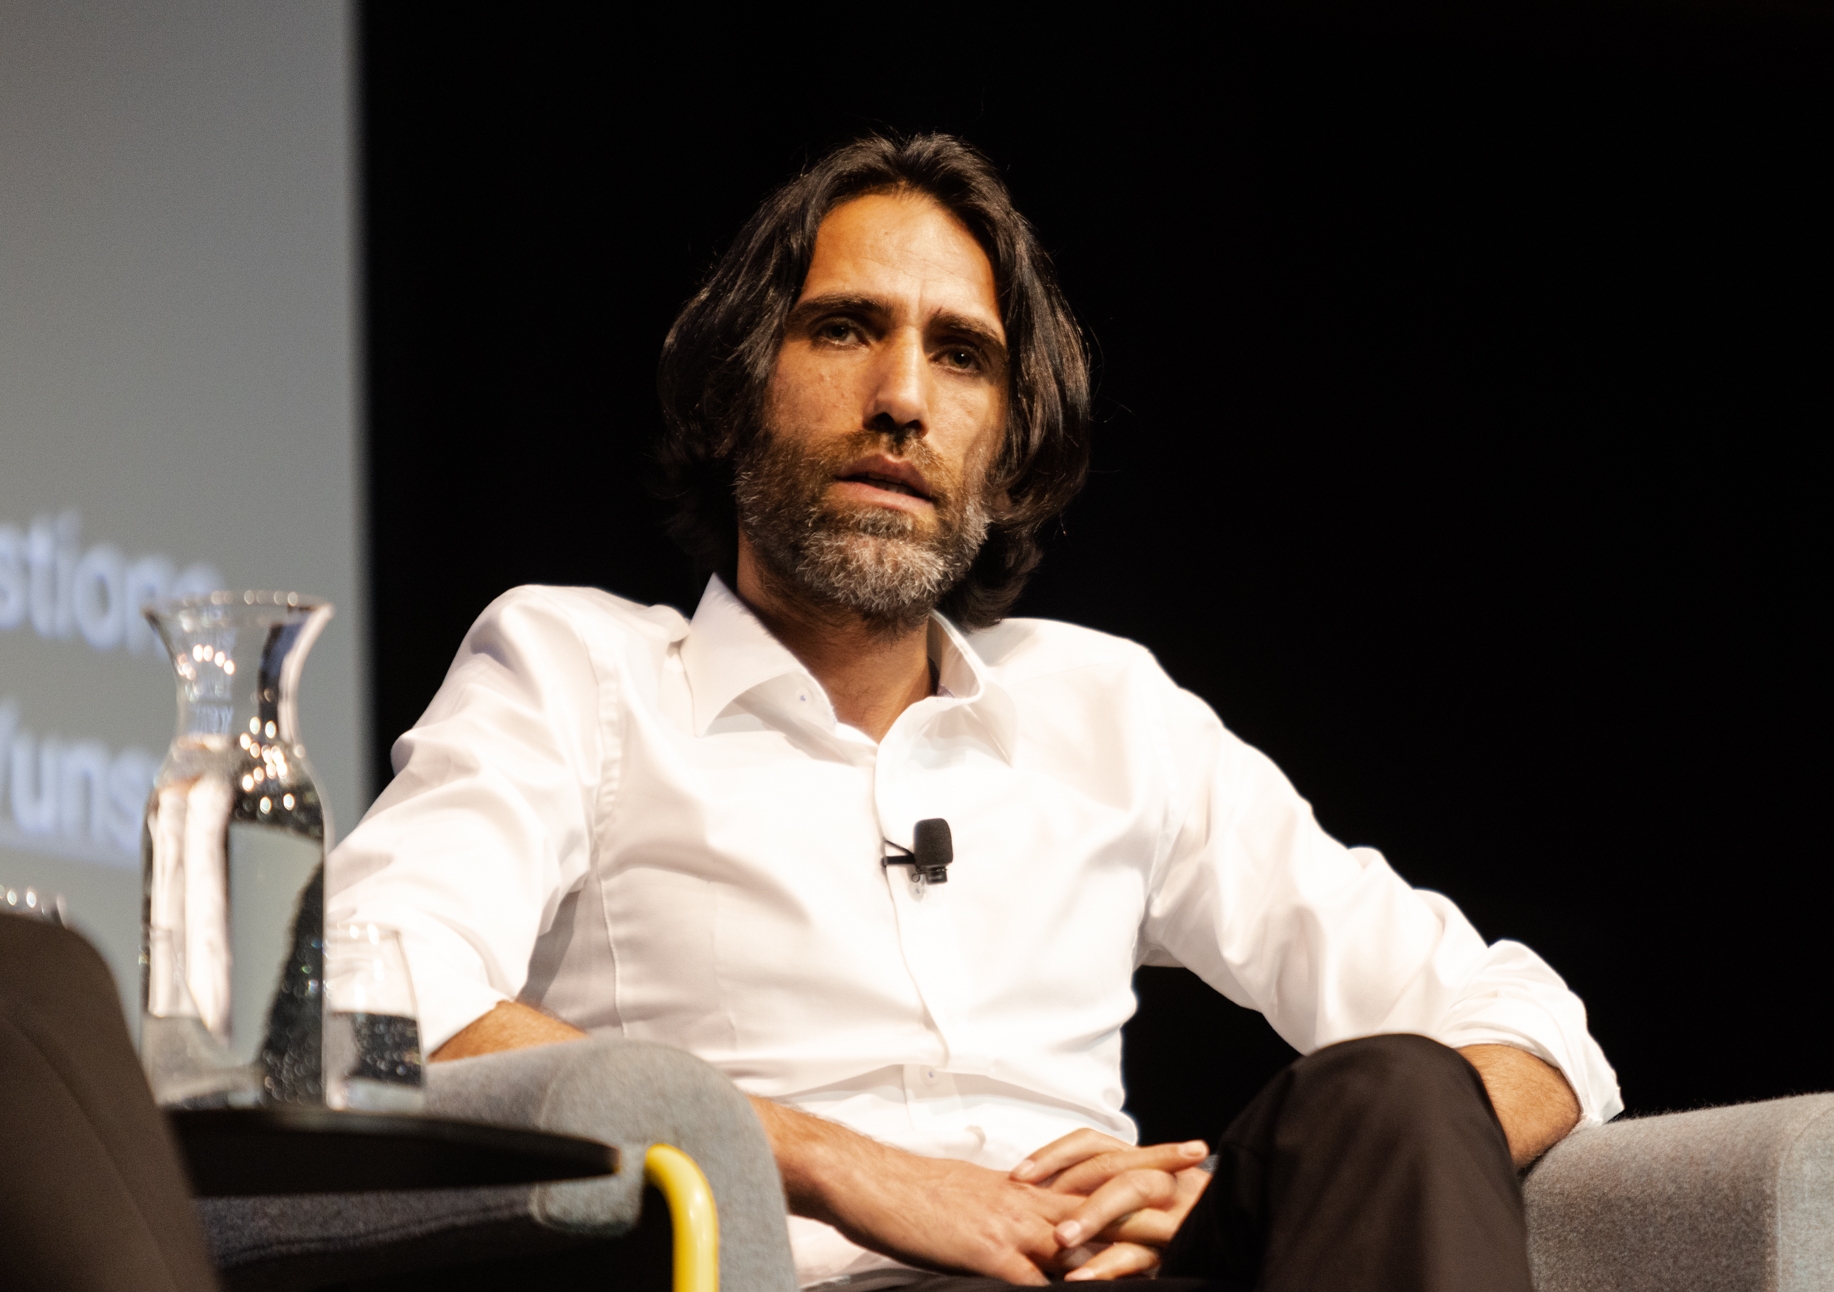 Behrouz Boochani was the guest speaker at UNSW’s Wallace Wurth Lecture. Photo: Maria Louise Boyadgis